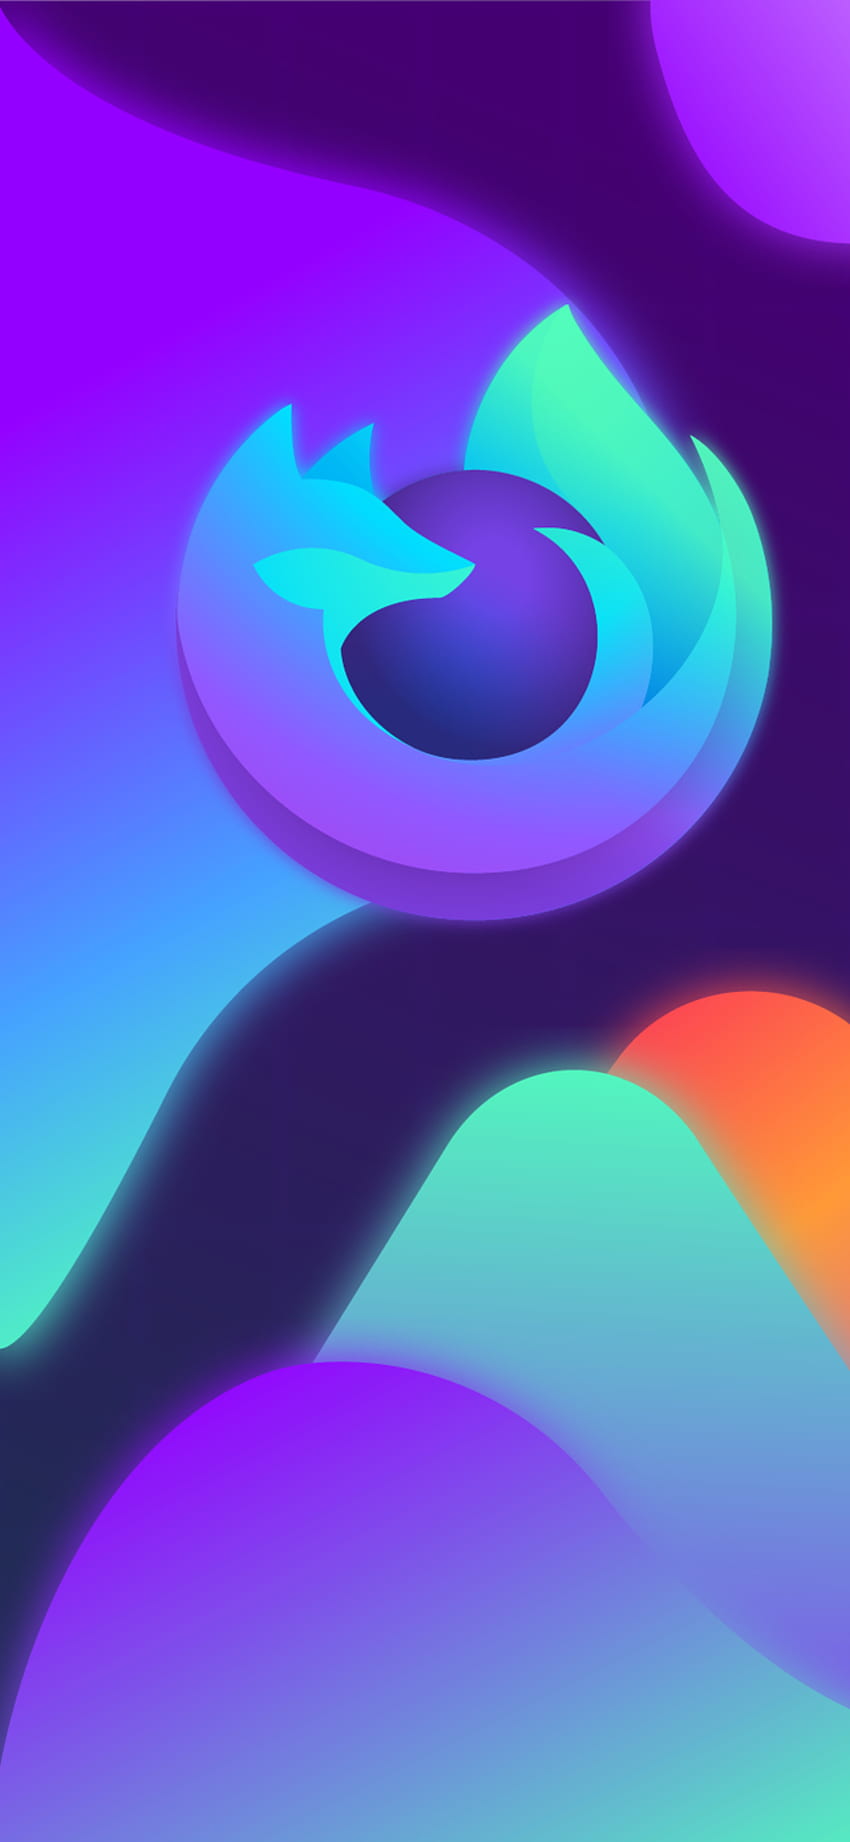 Was Bored And For Practice I End Up Making This For My Phone And, I Really Wanted To Share With You Guys! : R Firefox, Developer HD phone wallpaper